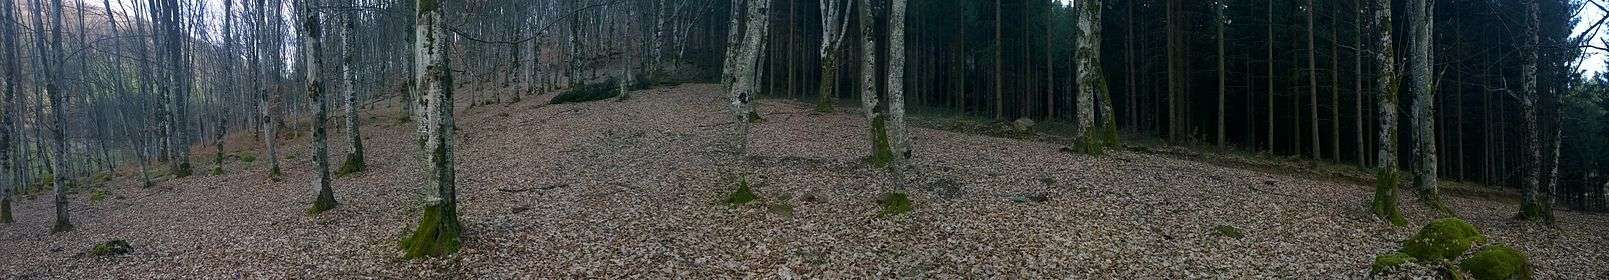 Two different forests in Vârciorog, Bihor Country, Romania.